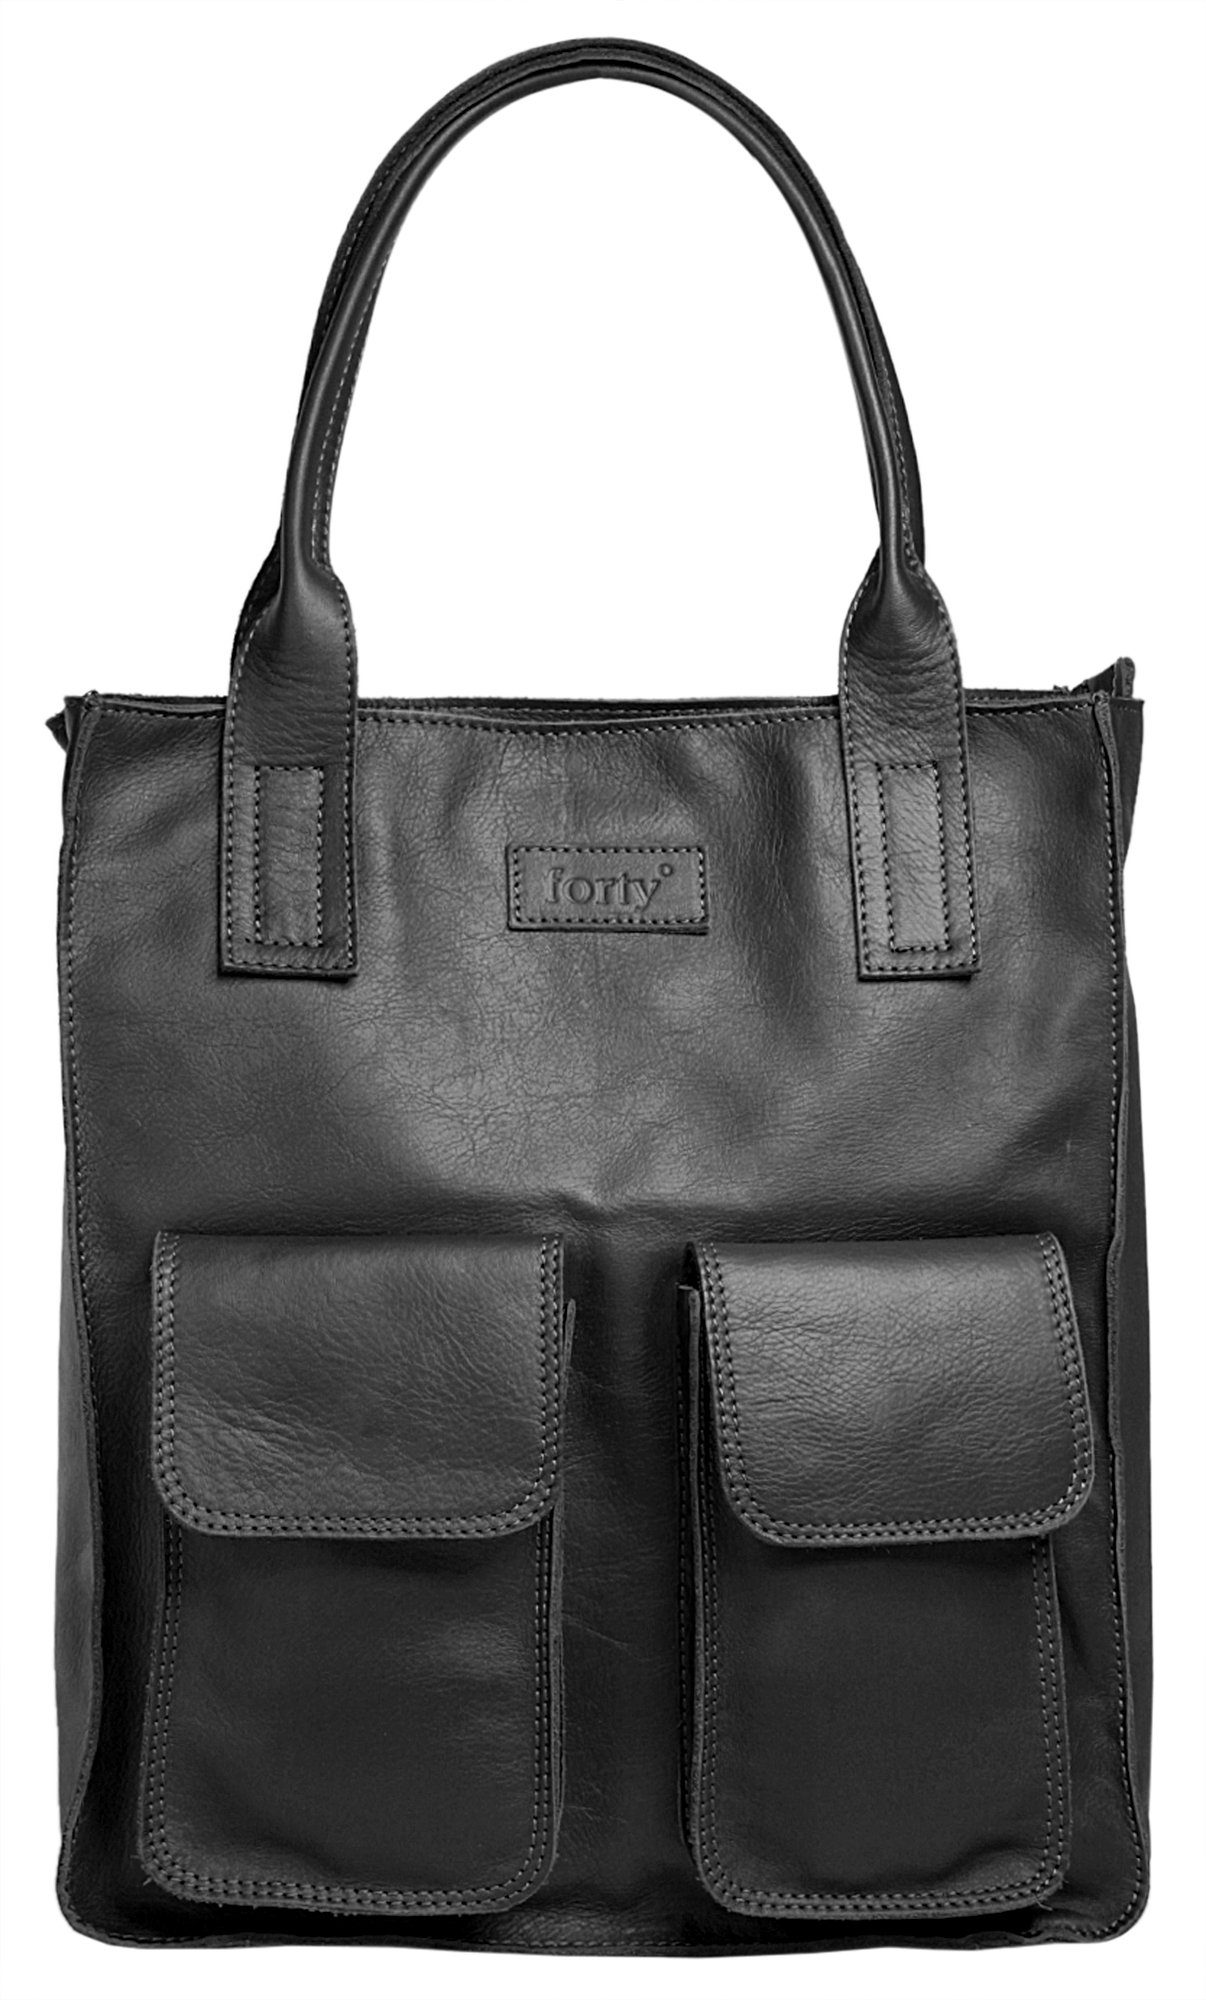 Otto - Forty Degrees NU 15% KORTING: Forty degrees shopper